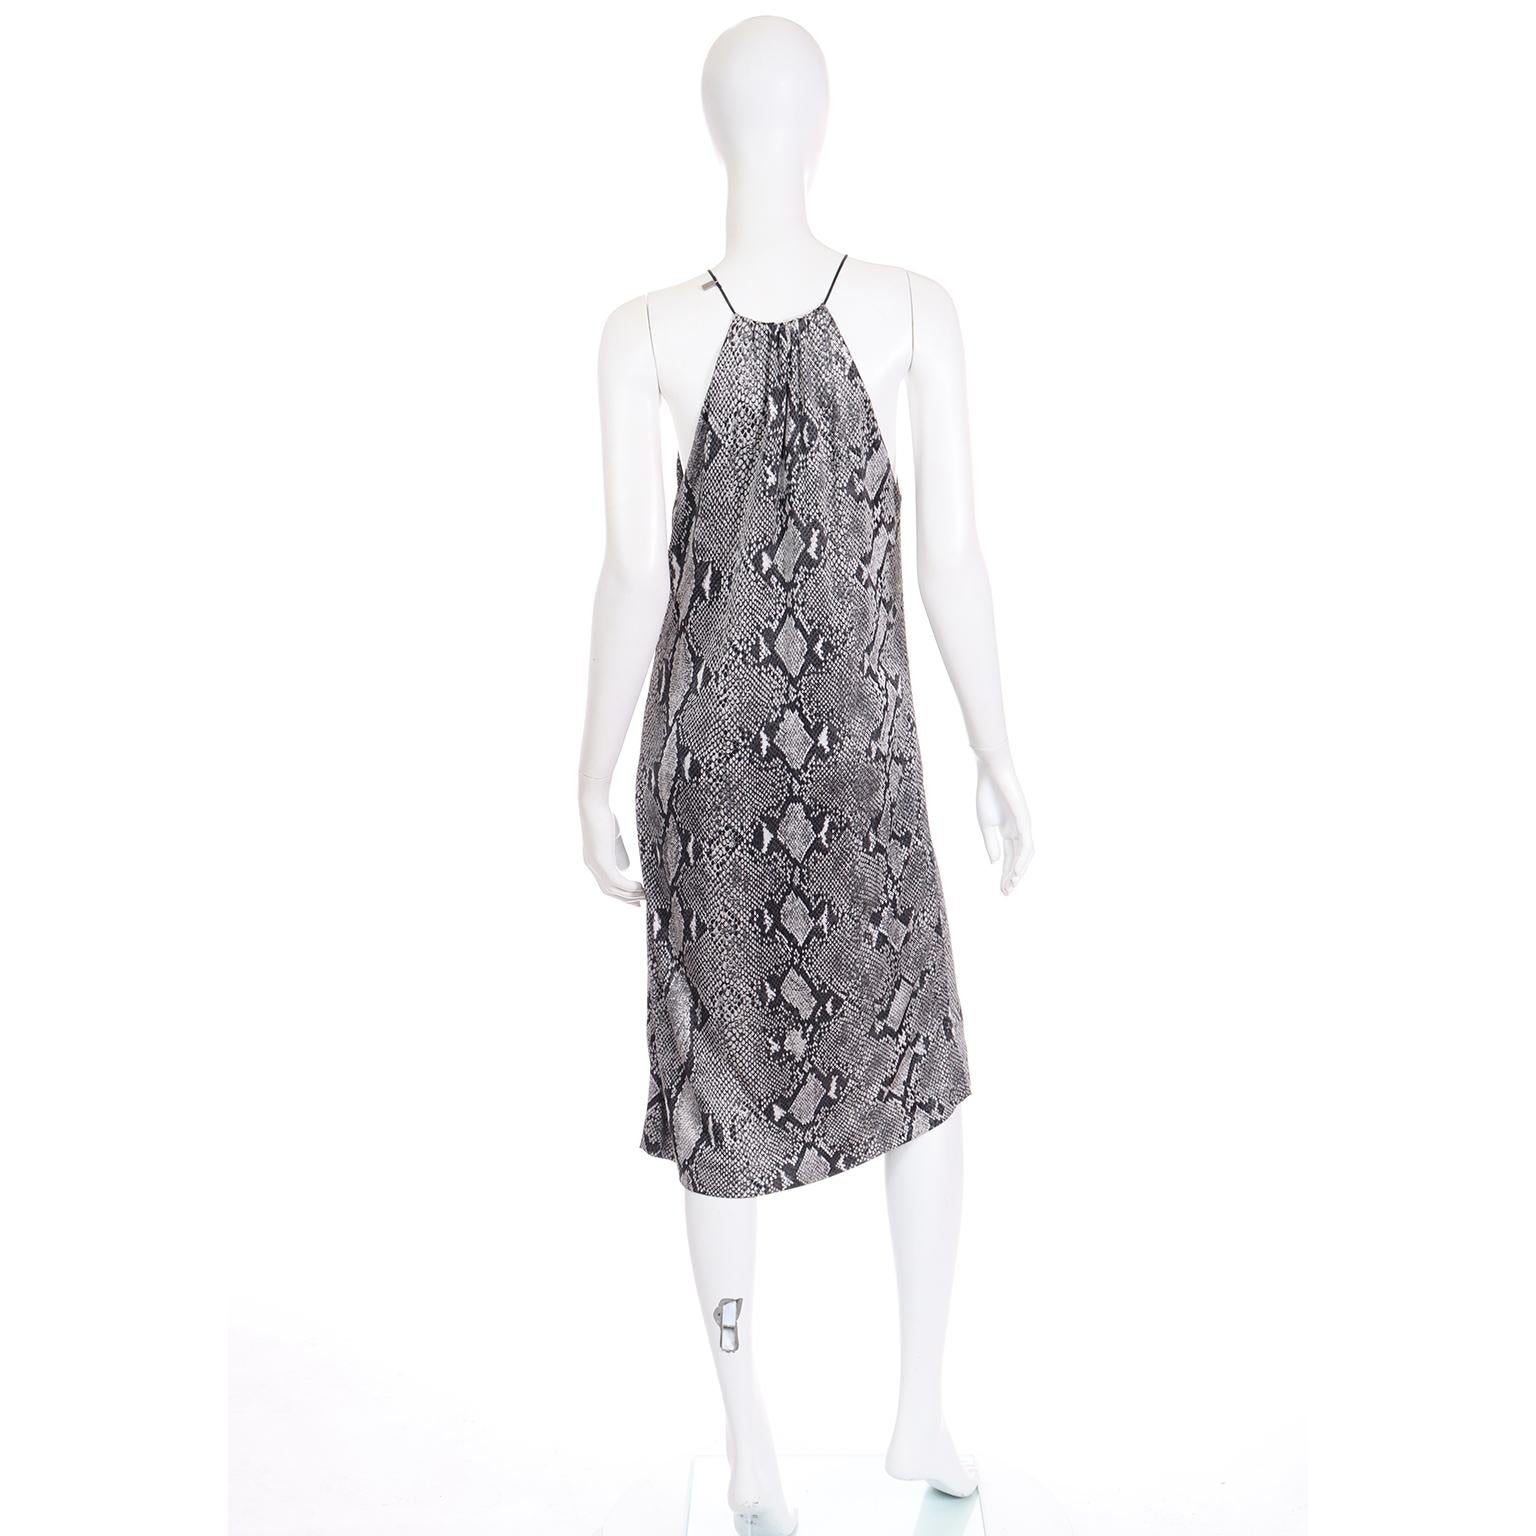 Women's Tom Ford For Gucci S/S 2000 Runway Python Print Rayon Dress w Plunging V For Sale